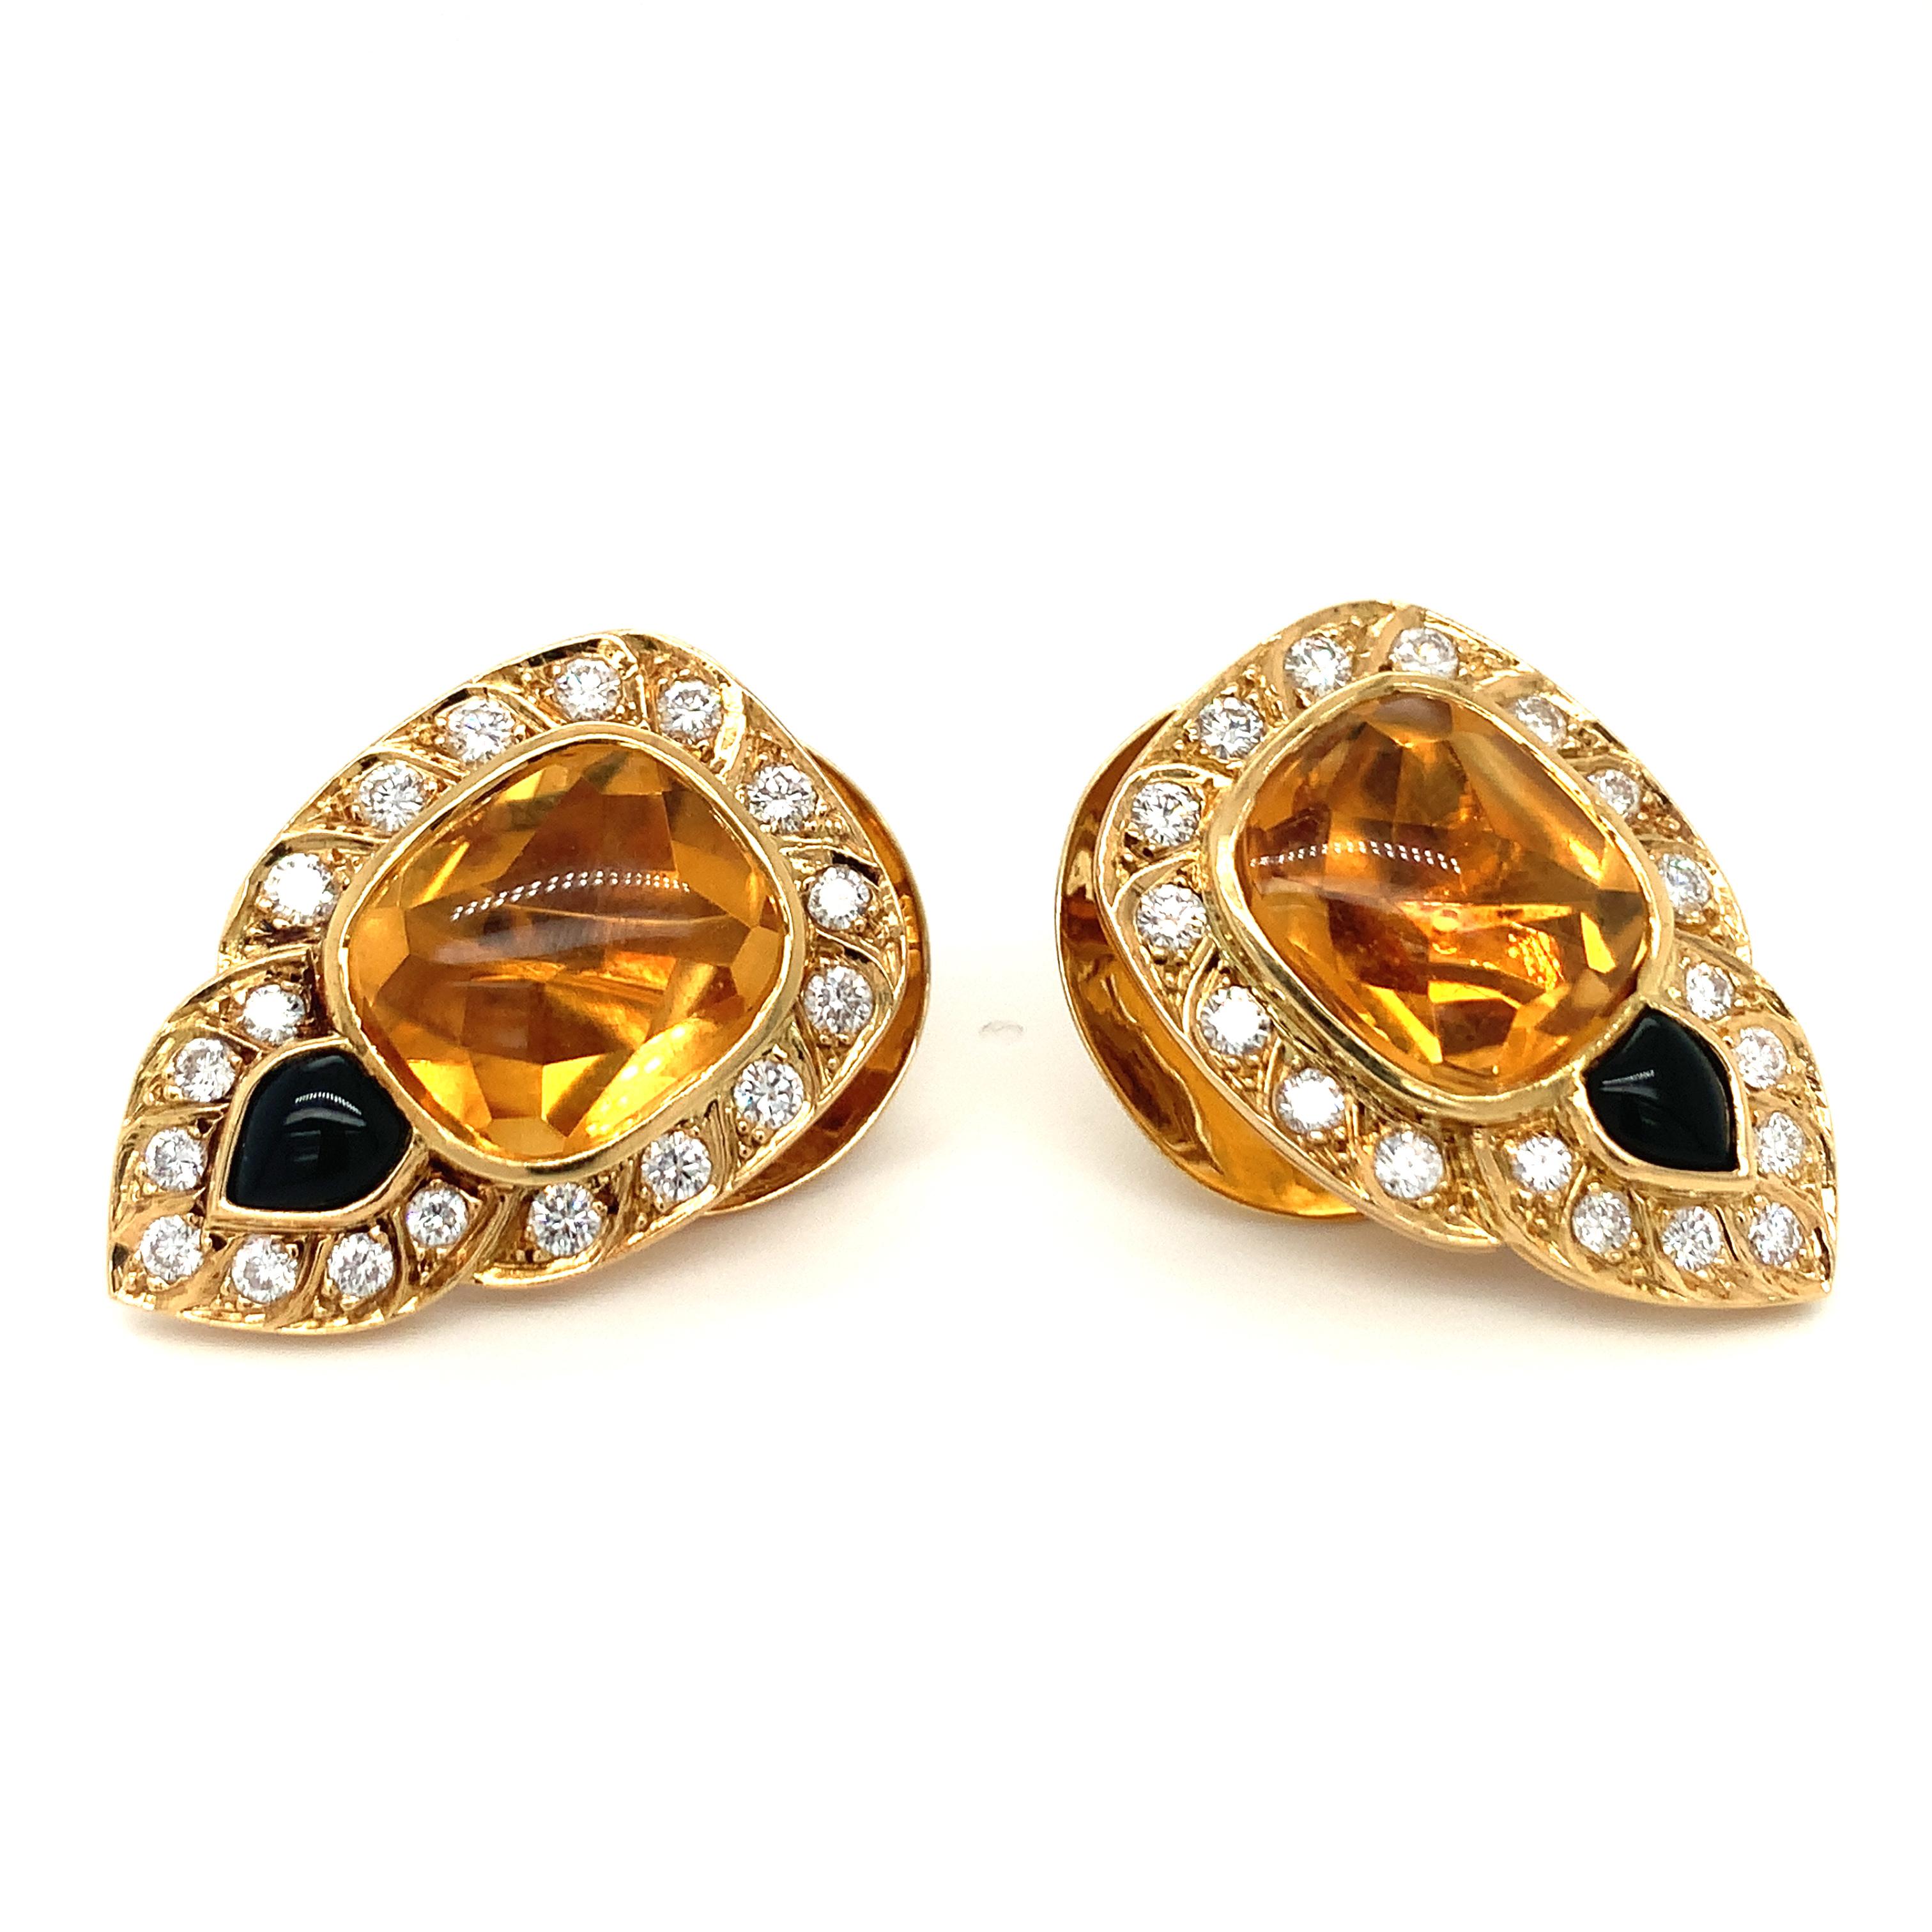 Cabochon Citrine, Onyx and Diamond 18K Gold Earrings by Chaumet For Sale